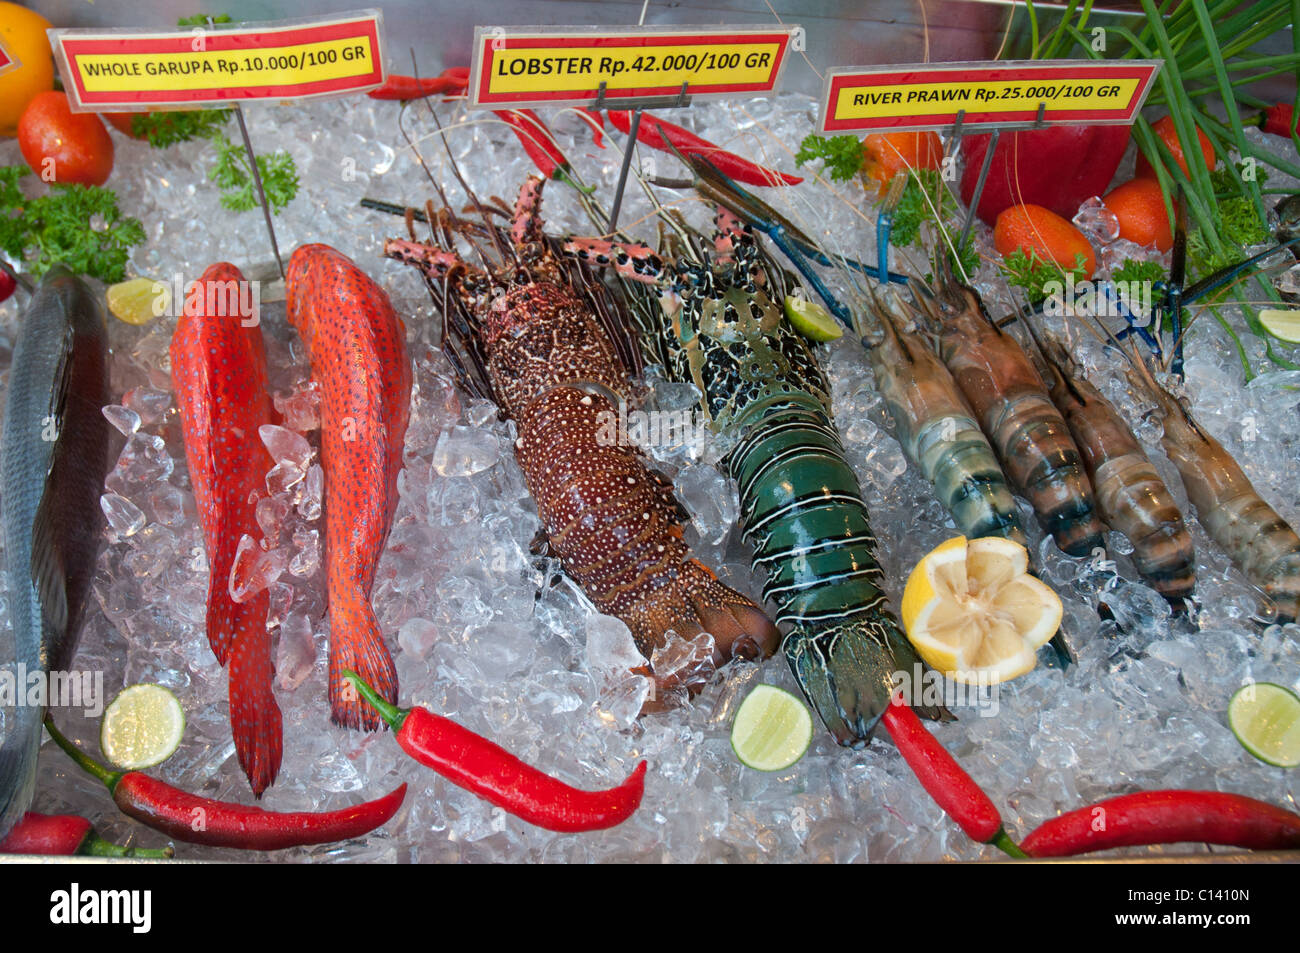 Display of fresh fish on ice outside a restaurant in Ubud, Bali, Indonesia Stock Photo